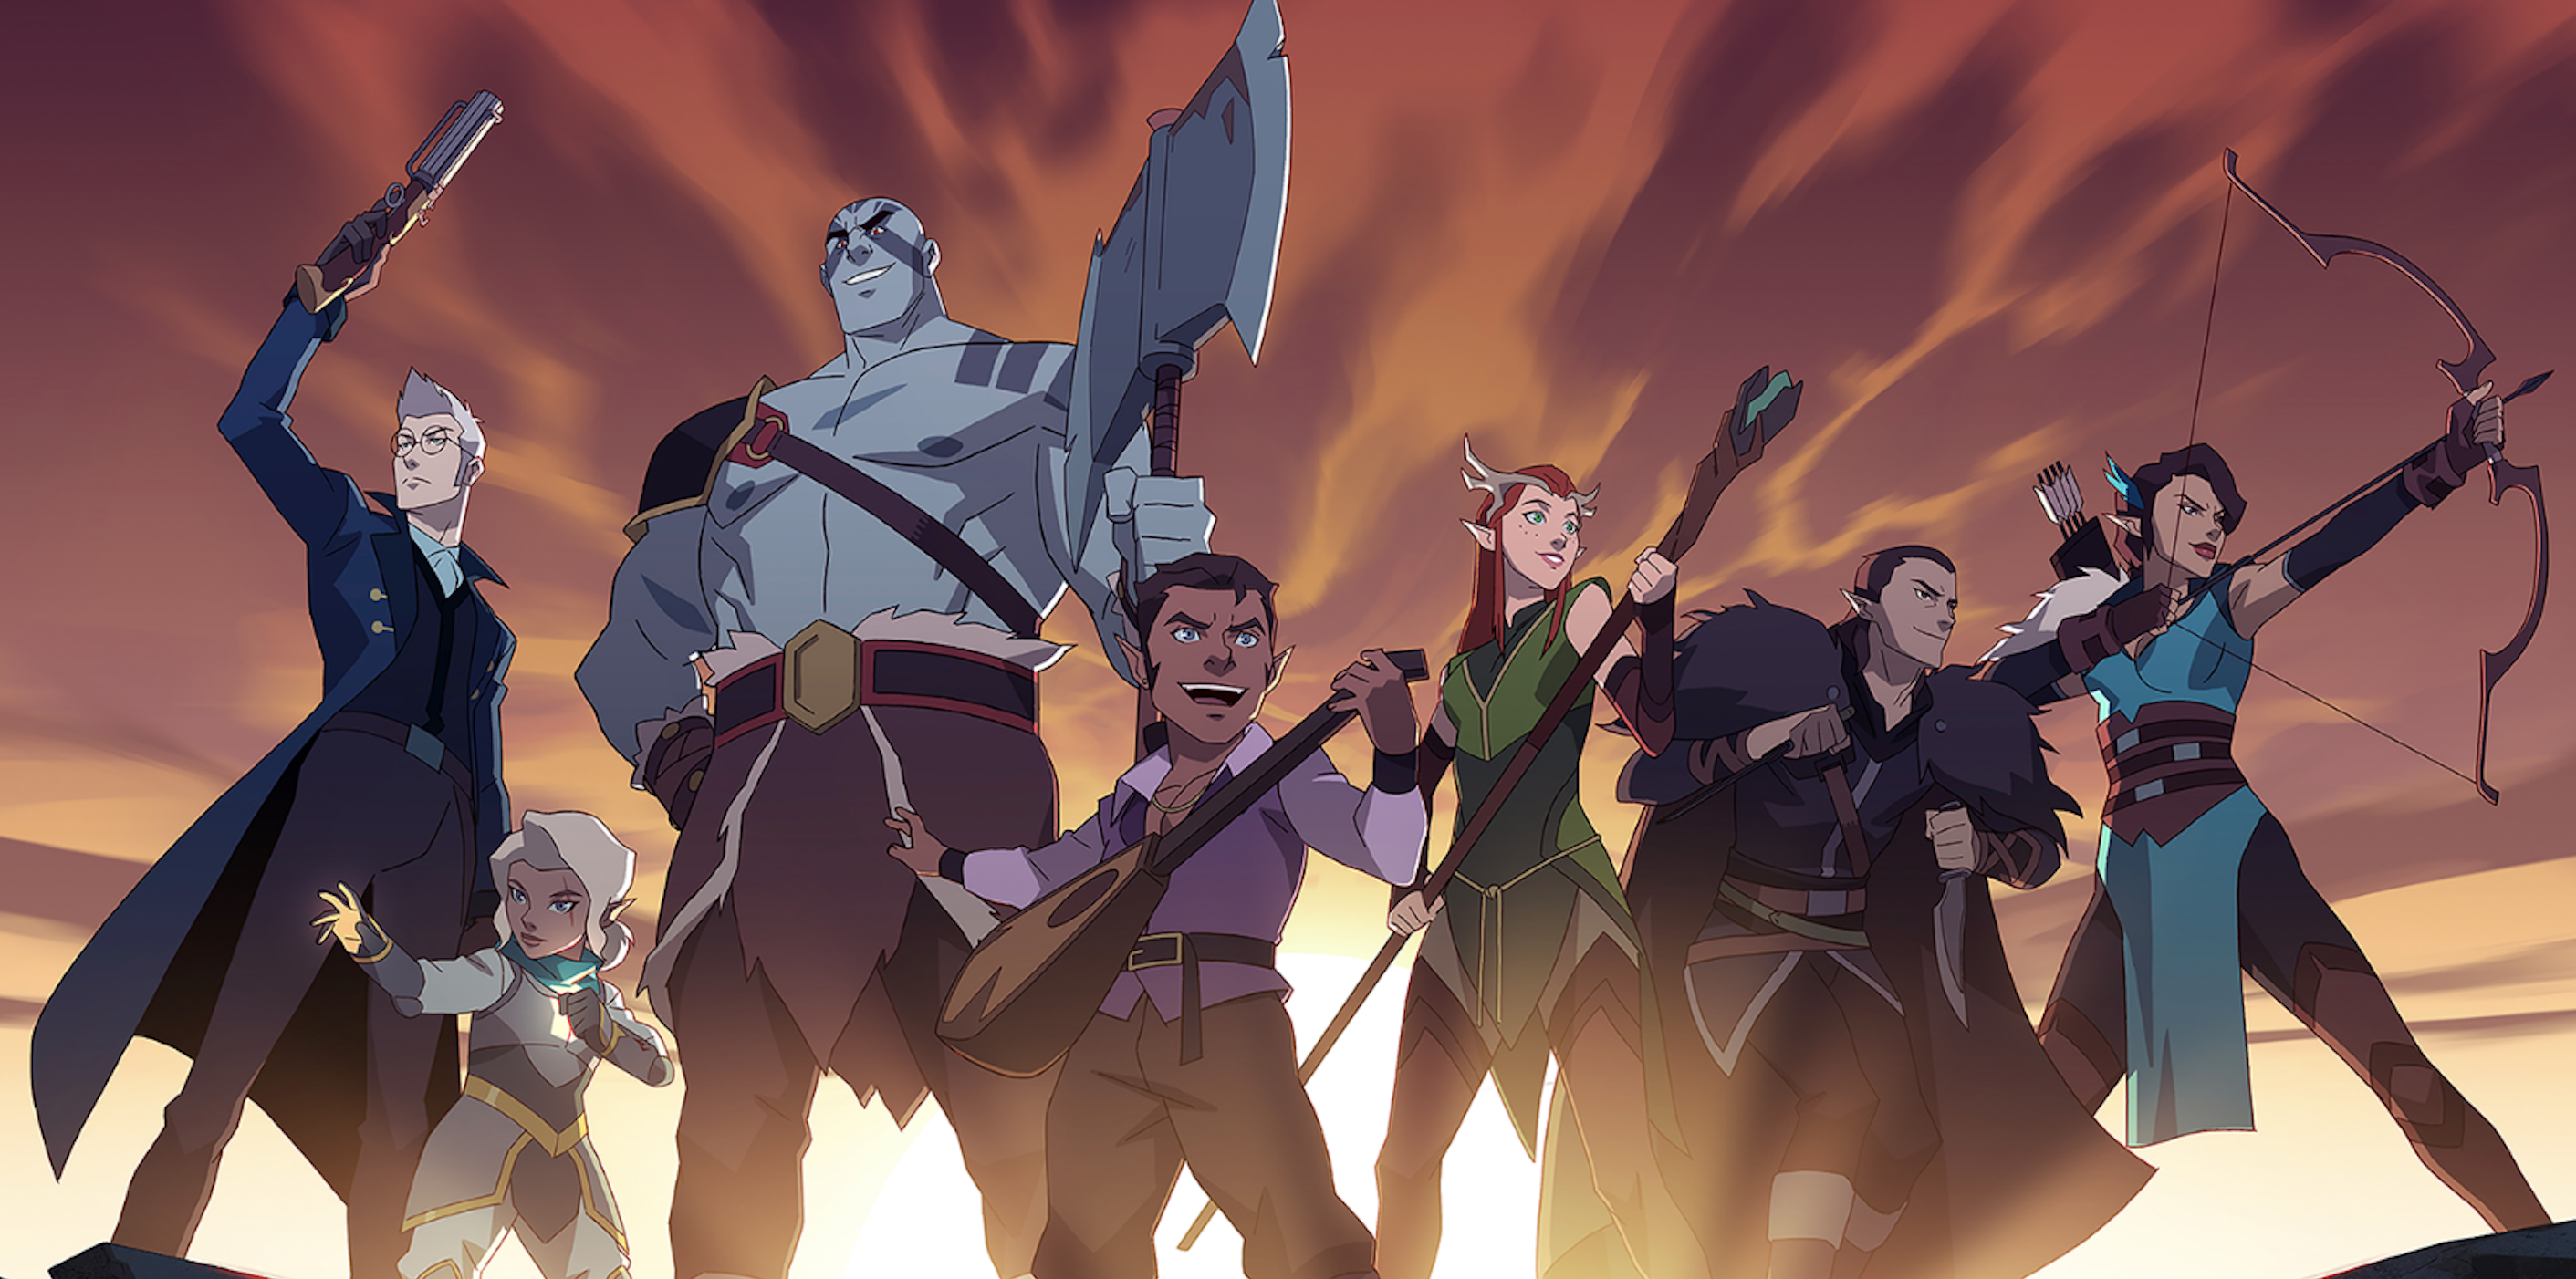 Legend of Vox Machina Season 2 is Officially Announced by  Studios